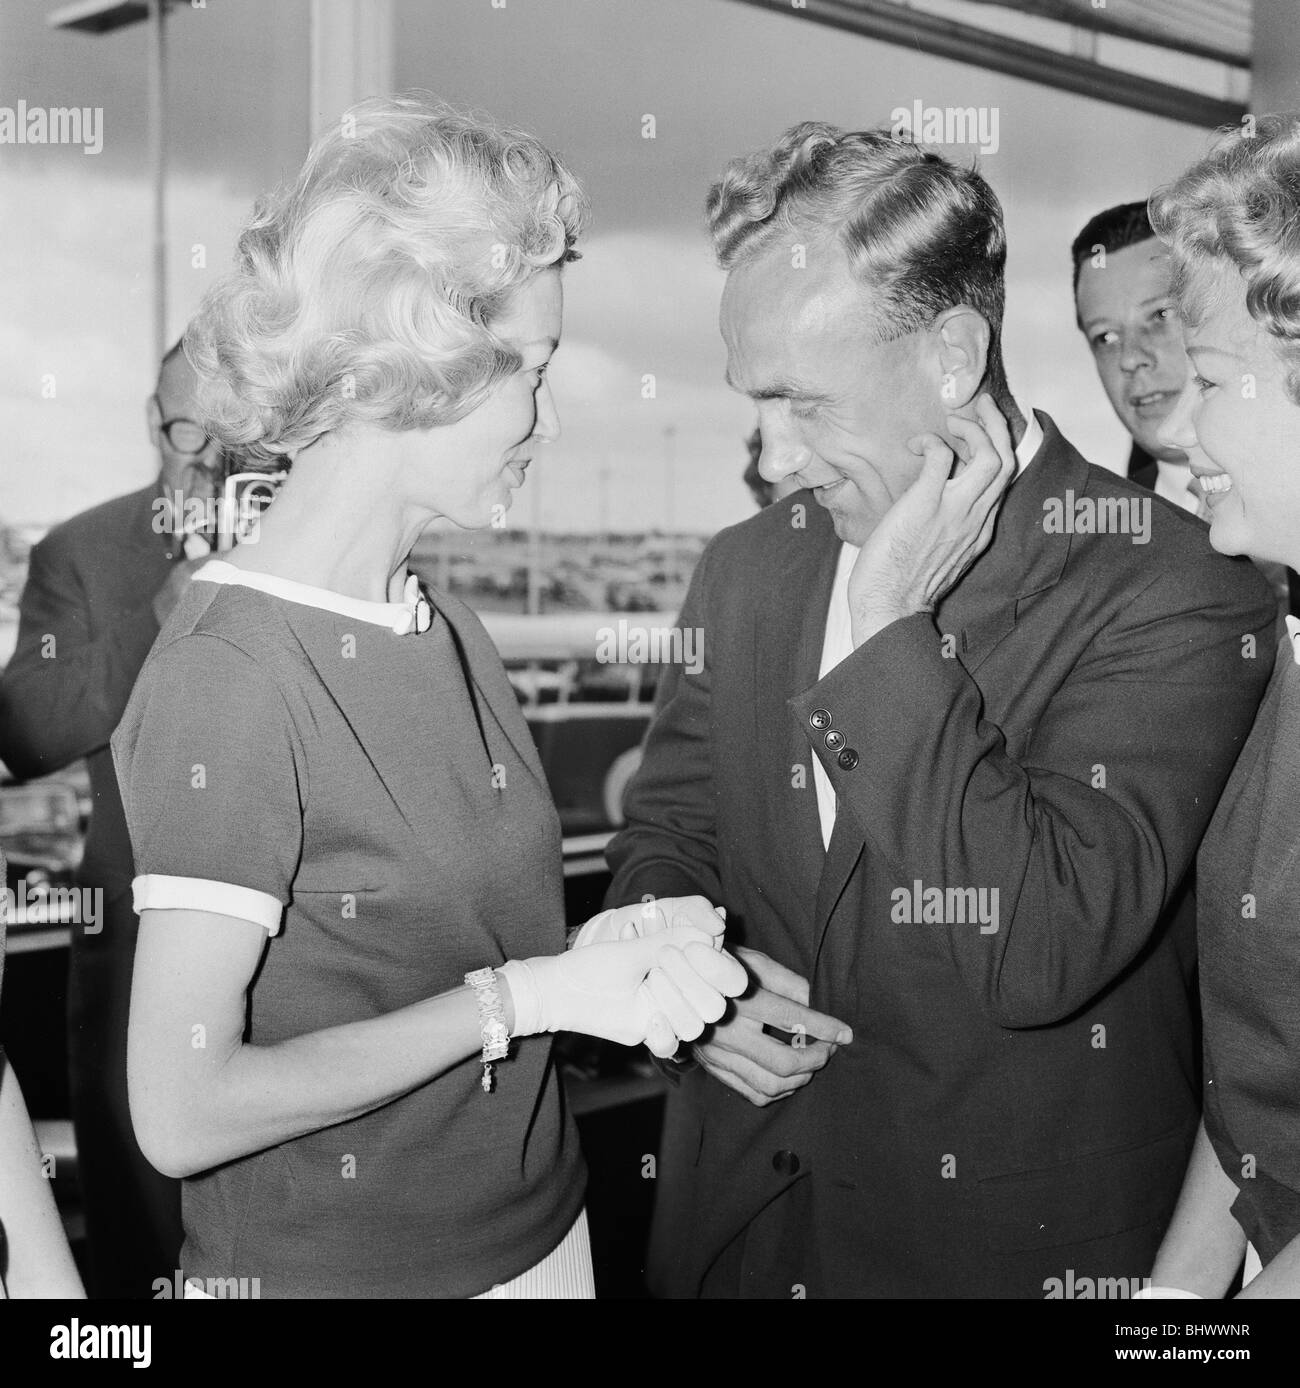 England footballer Billy Wright is greeted by his girlfriend Joy of the Beverley Sisters as he arrives at London Airport, following England's elimination from the 1958 World Cup tournament in Sweden. 23rd June 1958. Stock Photo